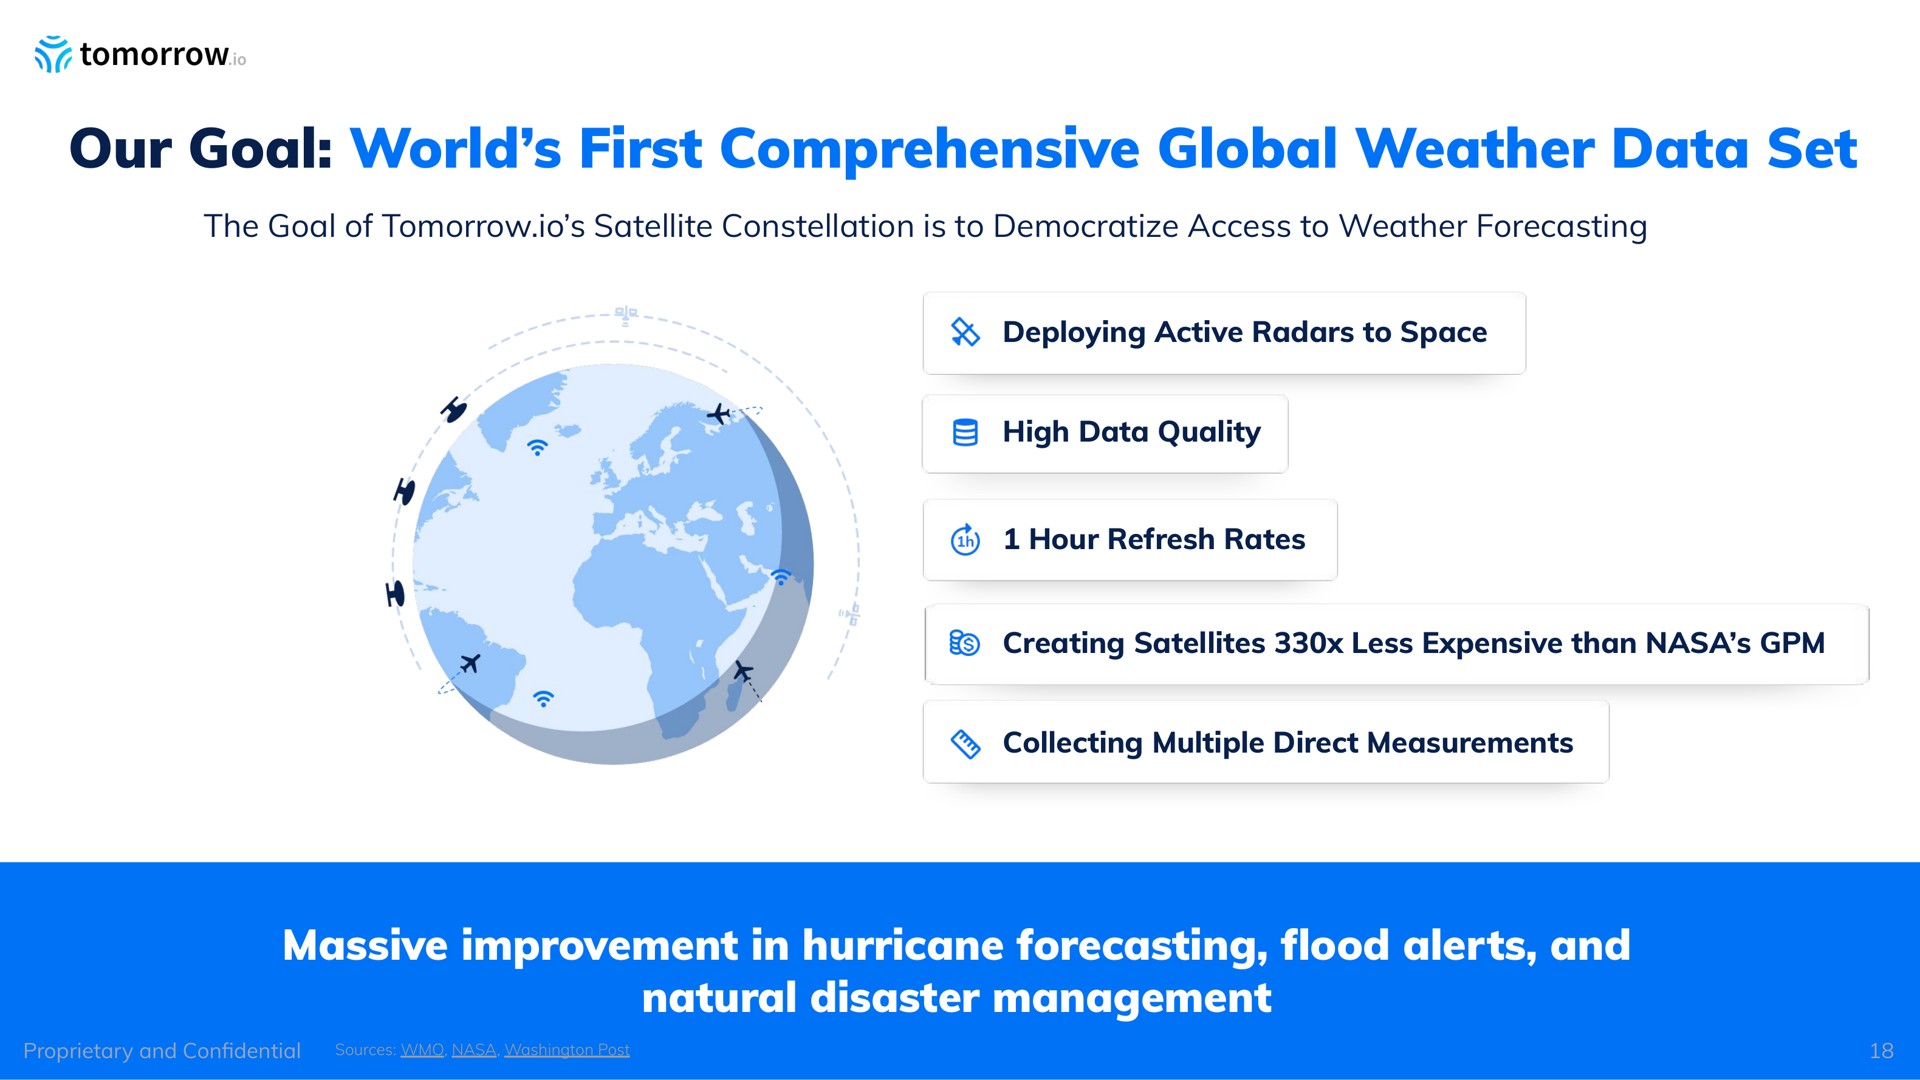 our goal world first comprehensive global weather data set massive improvement in hurricane forecasting alerts and natural disaster management | Tomorrow.io